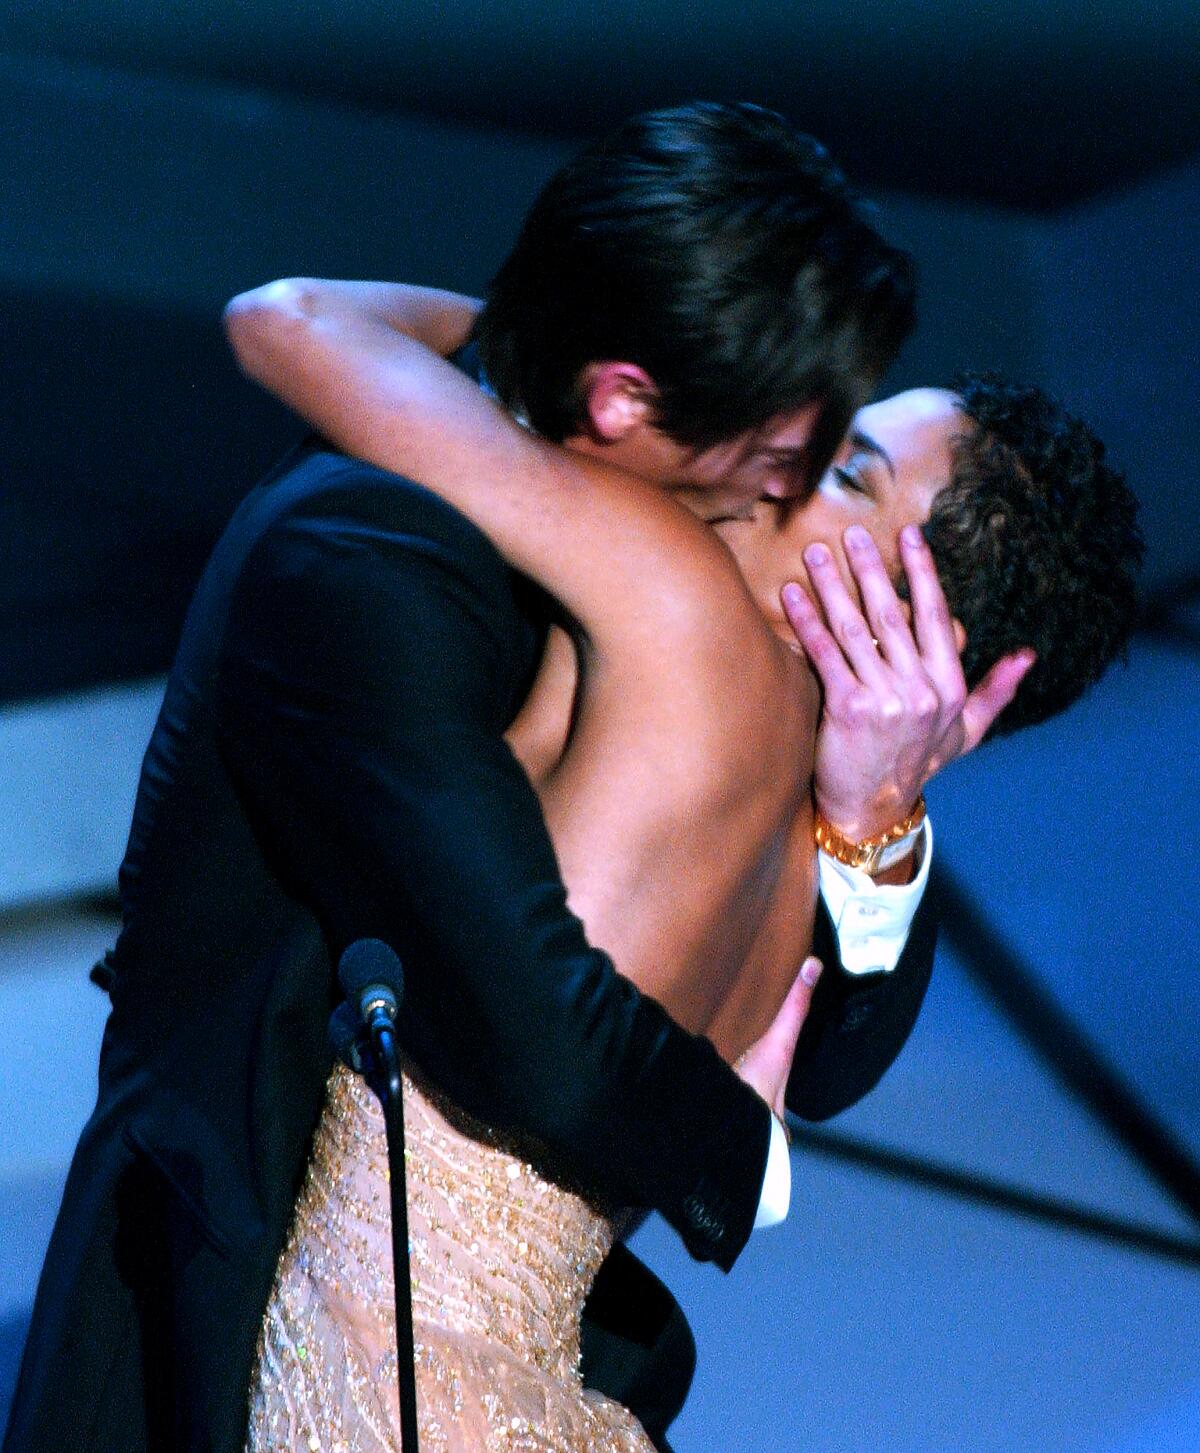 Actor Adrien Brody surprises presenter Halle Berry with a kiss 